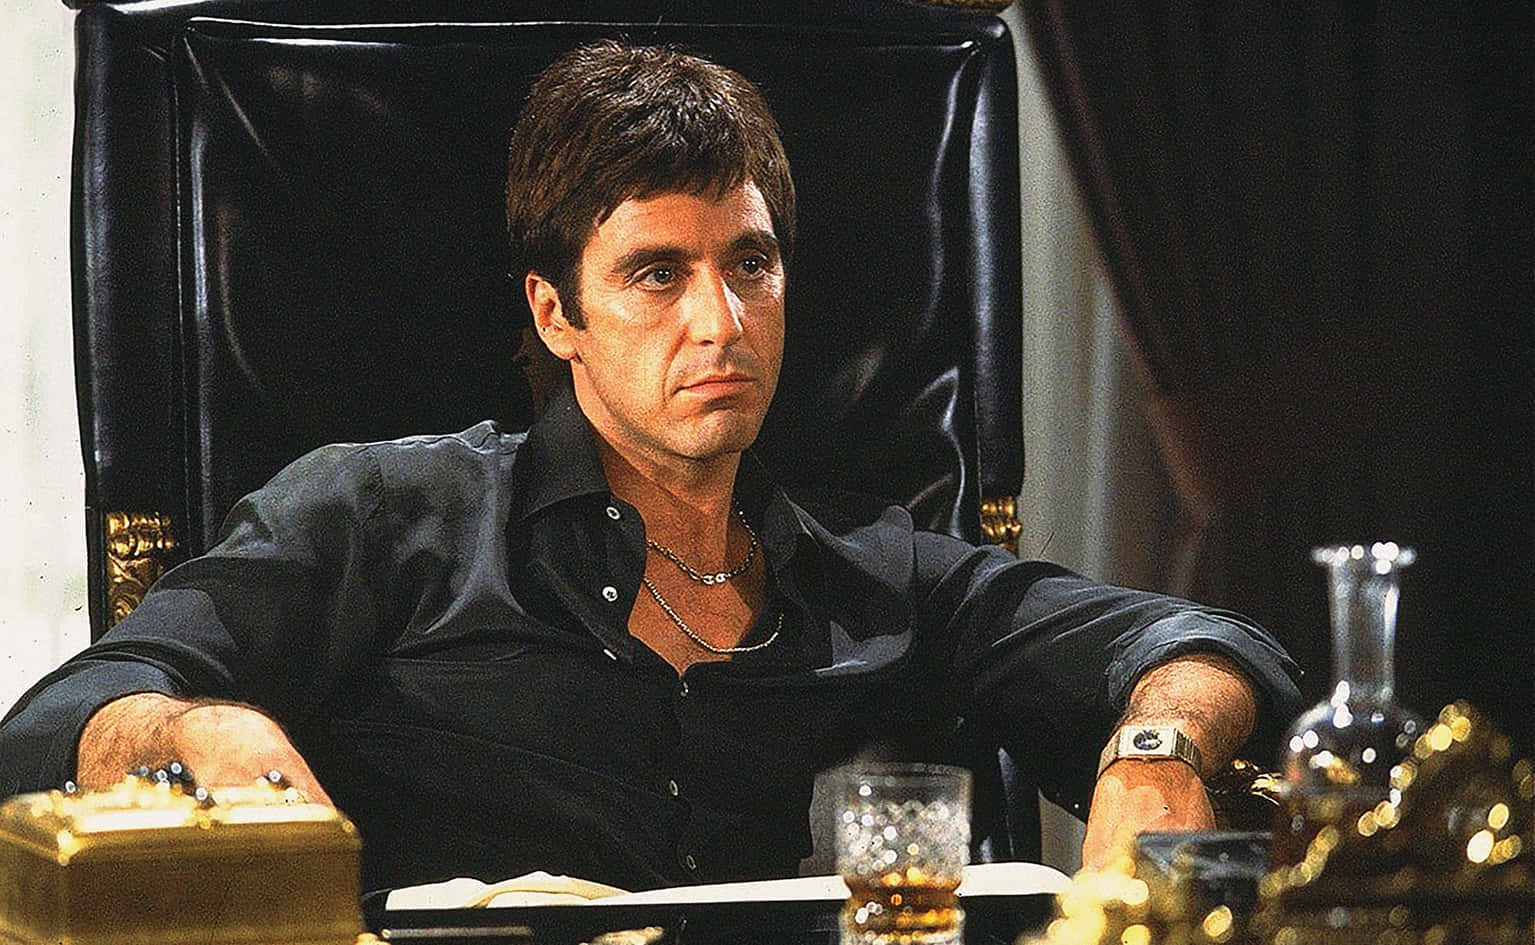 Beware, this is the world of Scarface